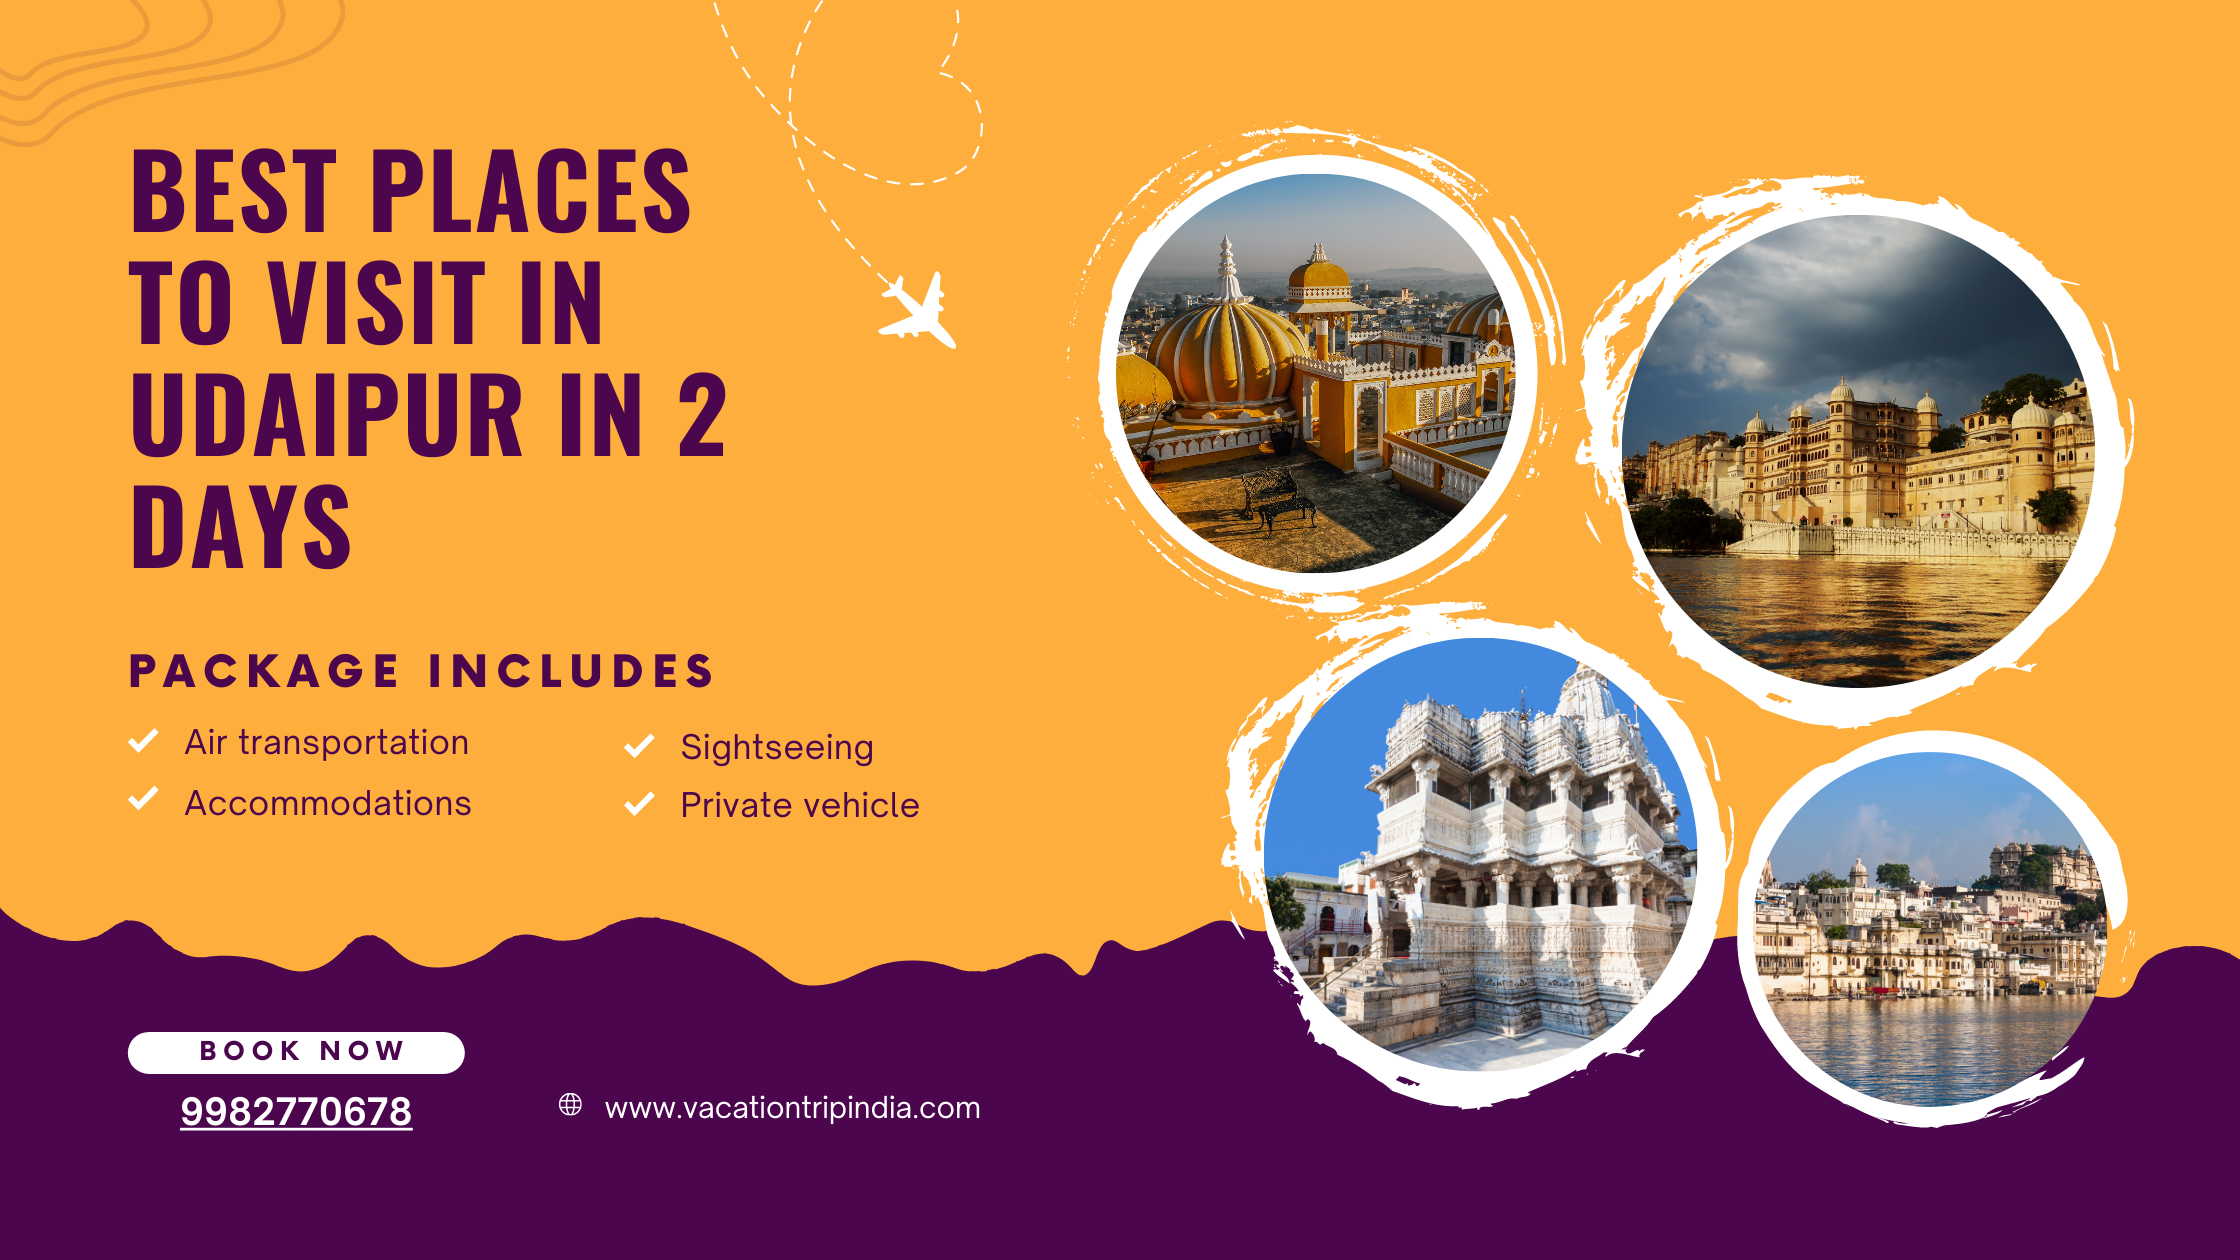 Best Places to Visit in Udaipur in 2 Days